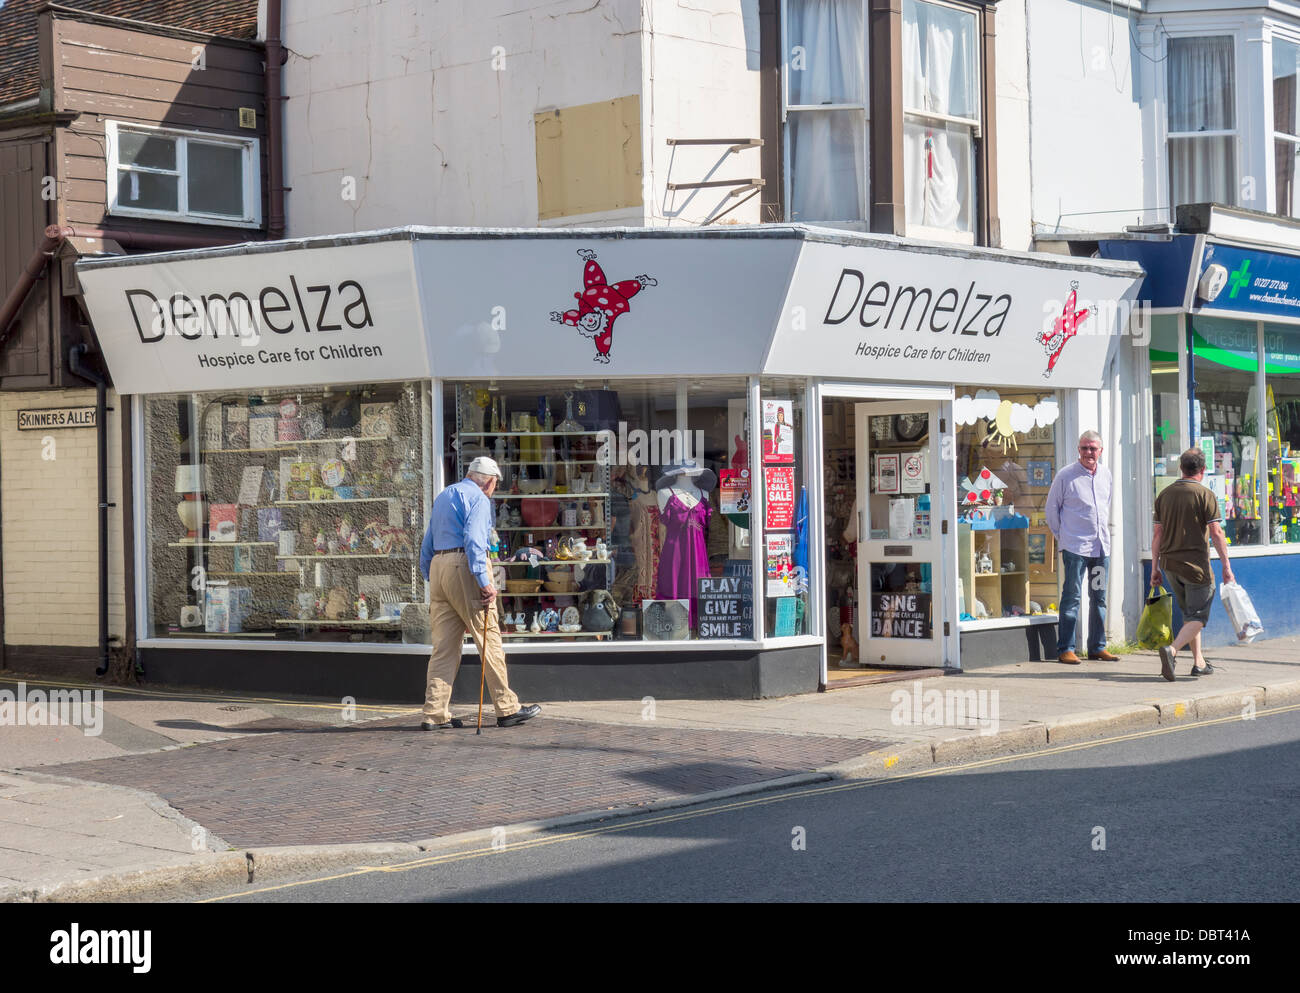 Demelza Hospice Care for Children Charity Shop Whitstable Kent Stock Photo